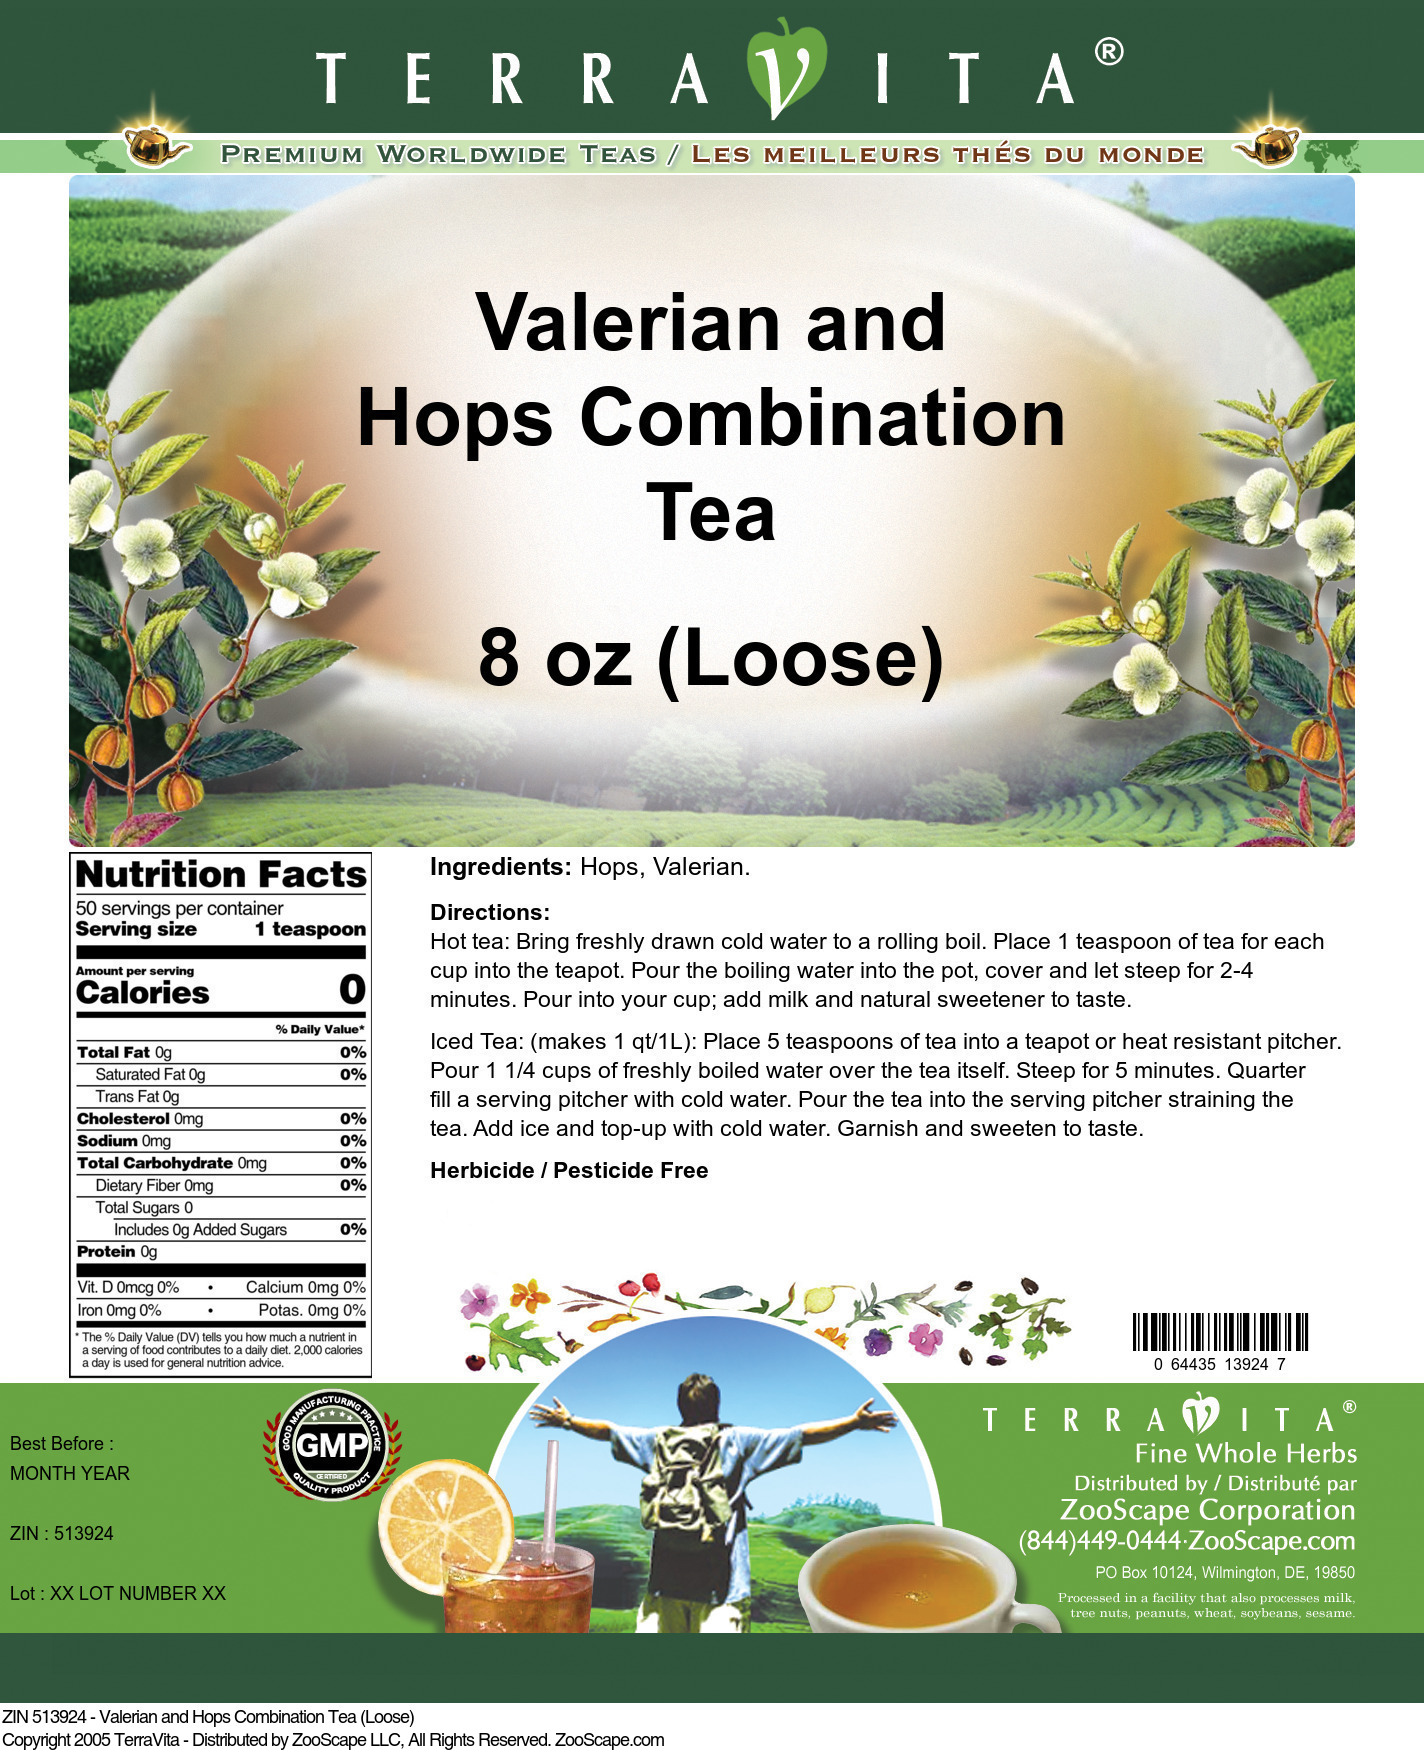 Valerian and Hops Combination Tea (Loose) - Label